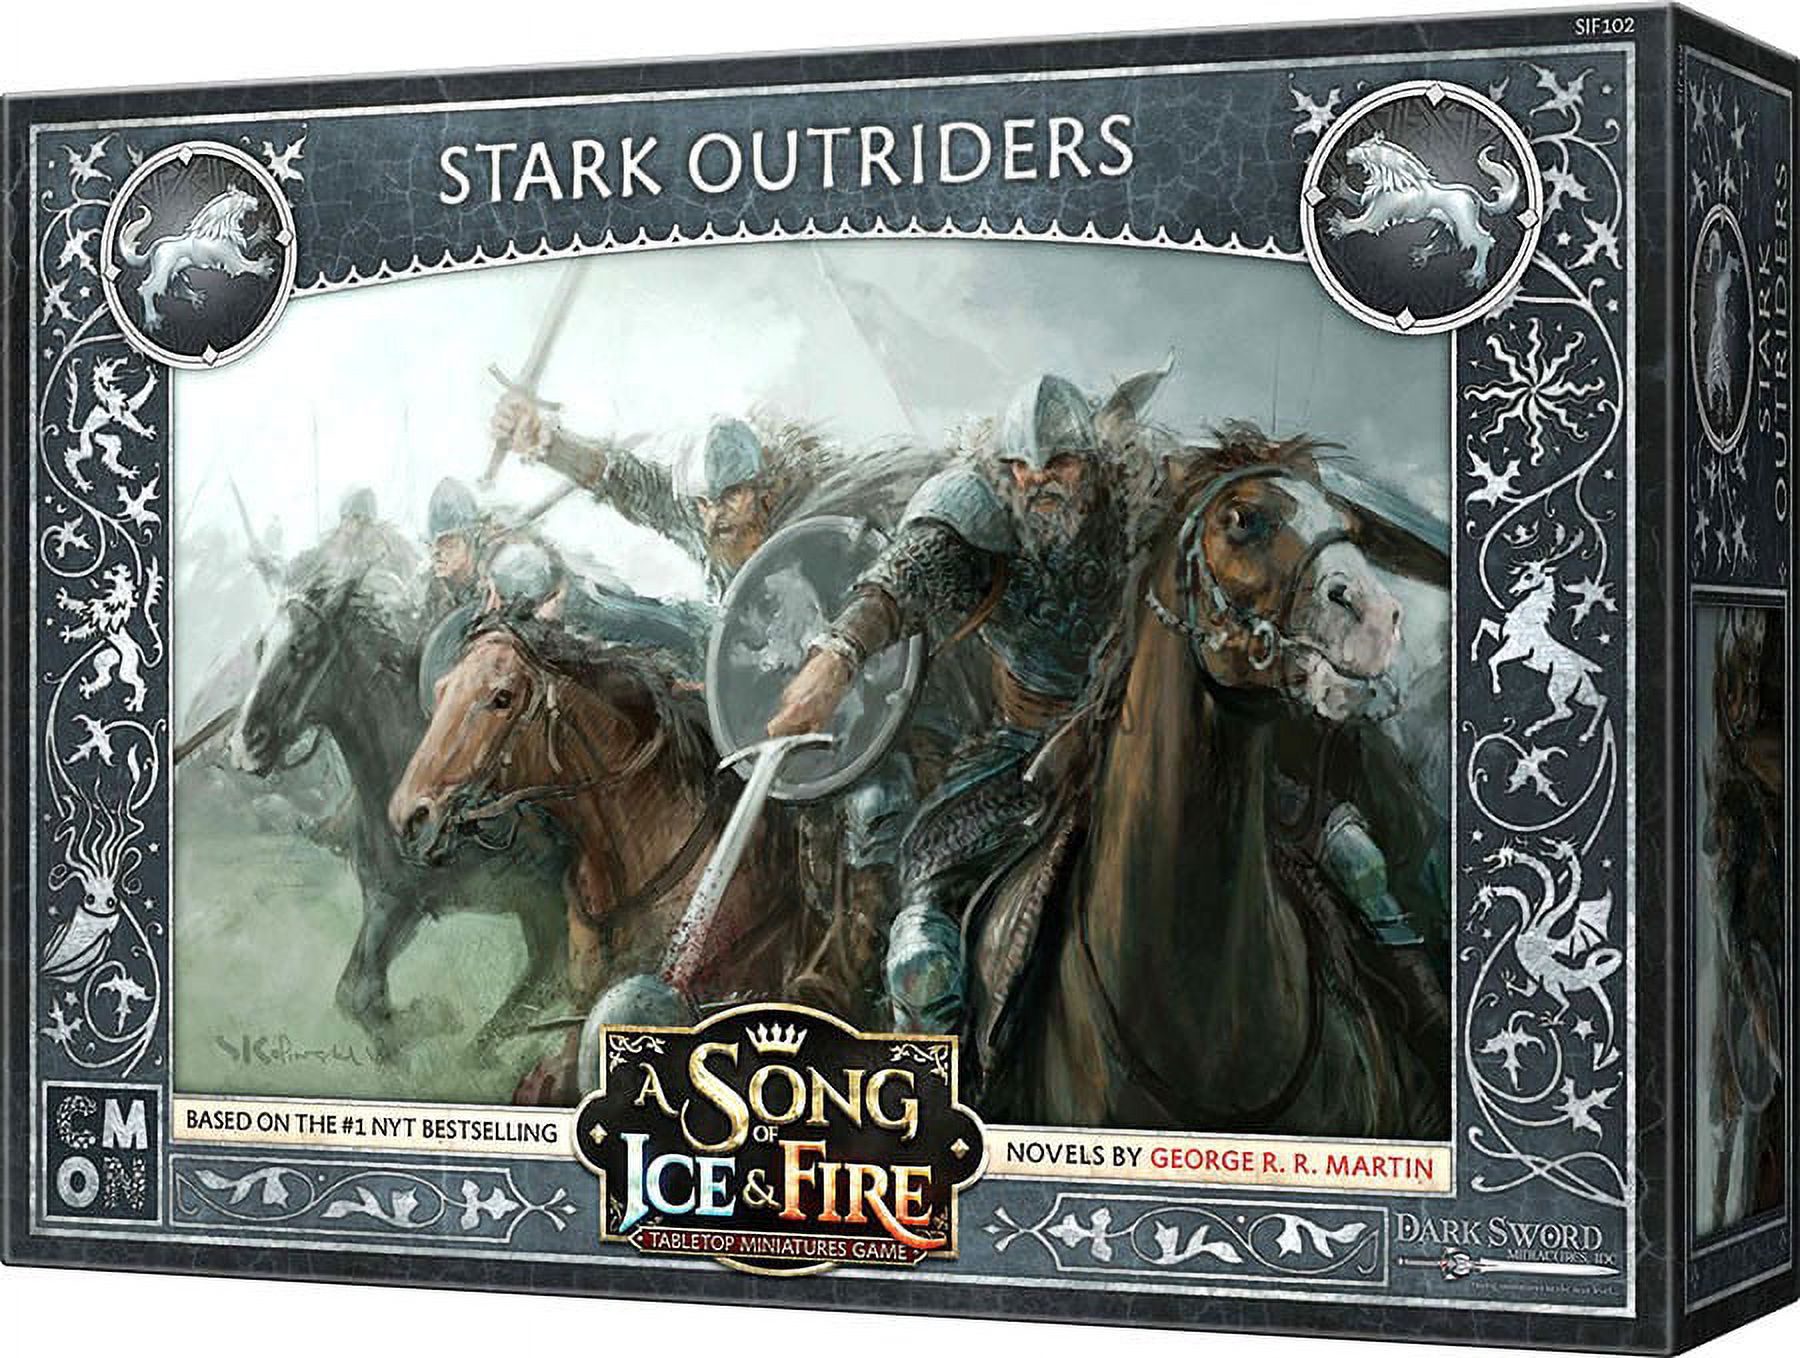 Cmon A Song of Ice & Fire: Tabletop Miniatures Game - Stark Outriders - image 1 of 2